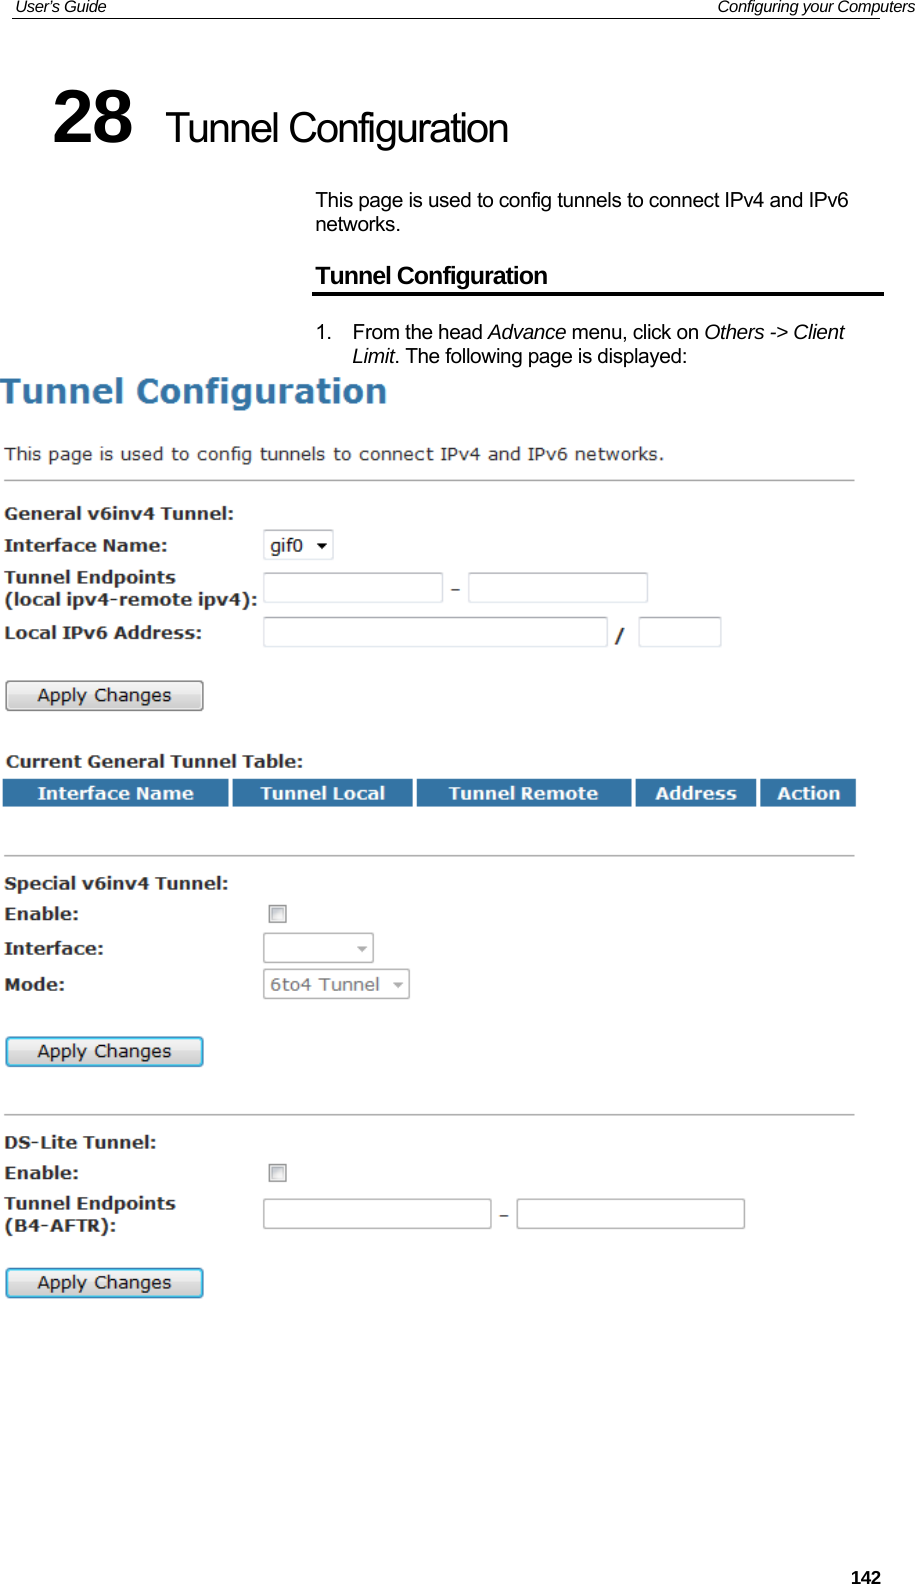 User’s Guide   Configuring your Computers 28  Tunnel Configuration This page is used to config tunnels to connect IPv4 and IPv6 networks. Tunnel Configuration 1. From the head Advance menu, click on Others -&gt; Client Limit. The following page is displayed:          142